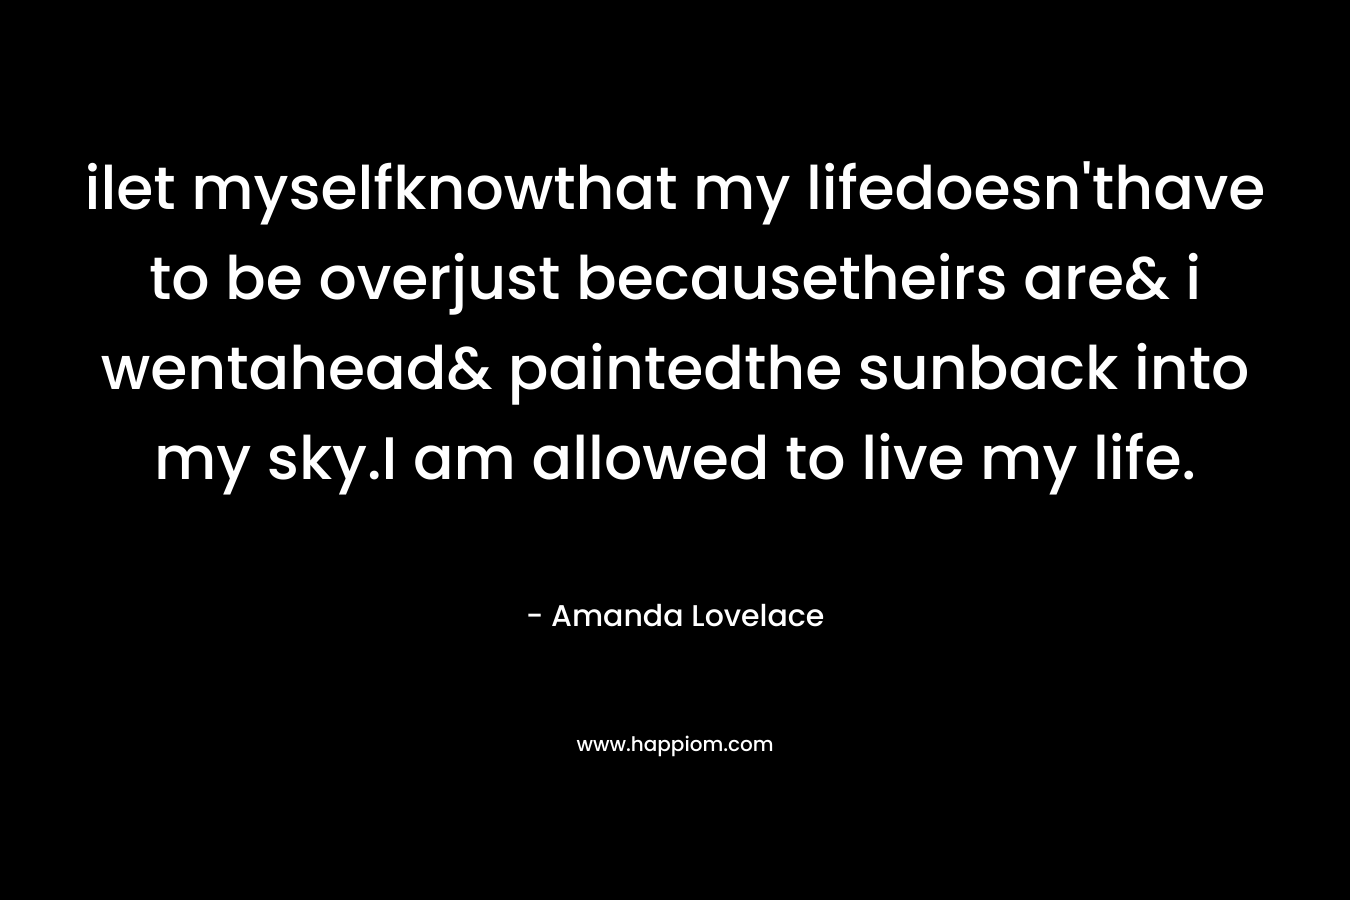 ilet myselfknowthat my lifedoesn'thave to be overjust becausetheirs are& i wentahead& paintedthe sunback into my sky.I am allowed to live my life.